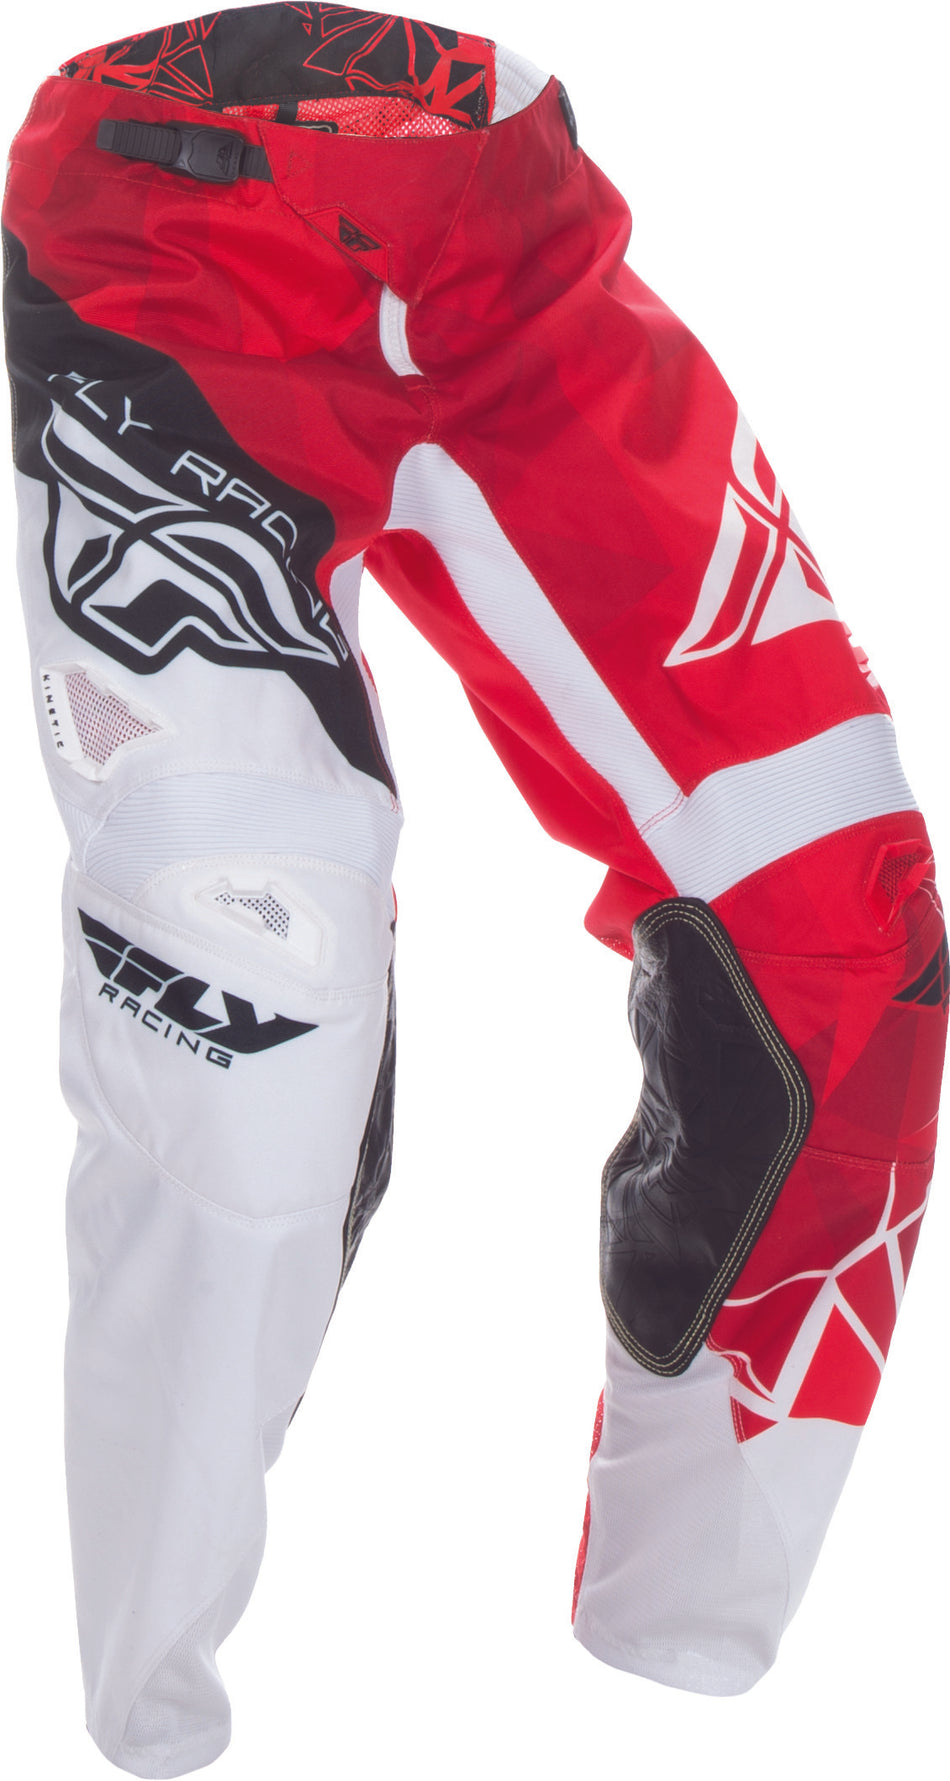 FLY RACING Kinetic Crux Pant Red/White Sz 24 370-53224